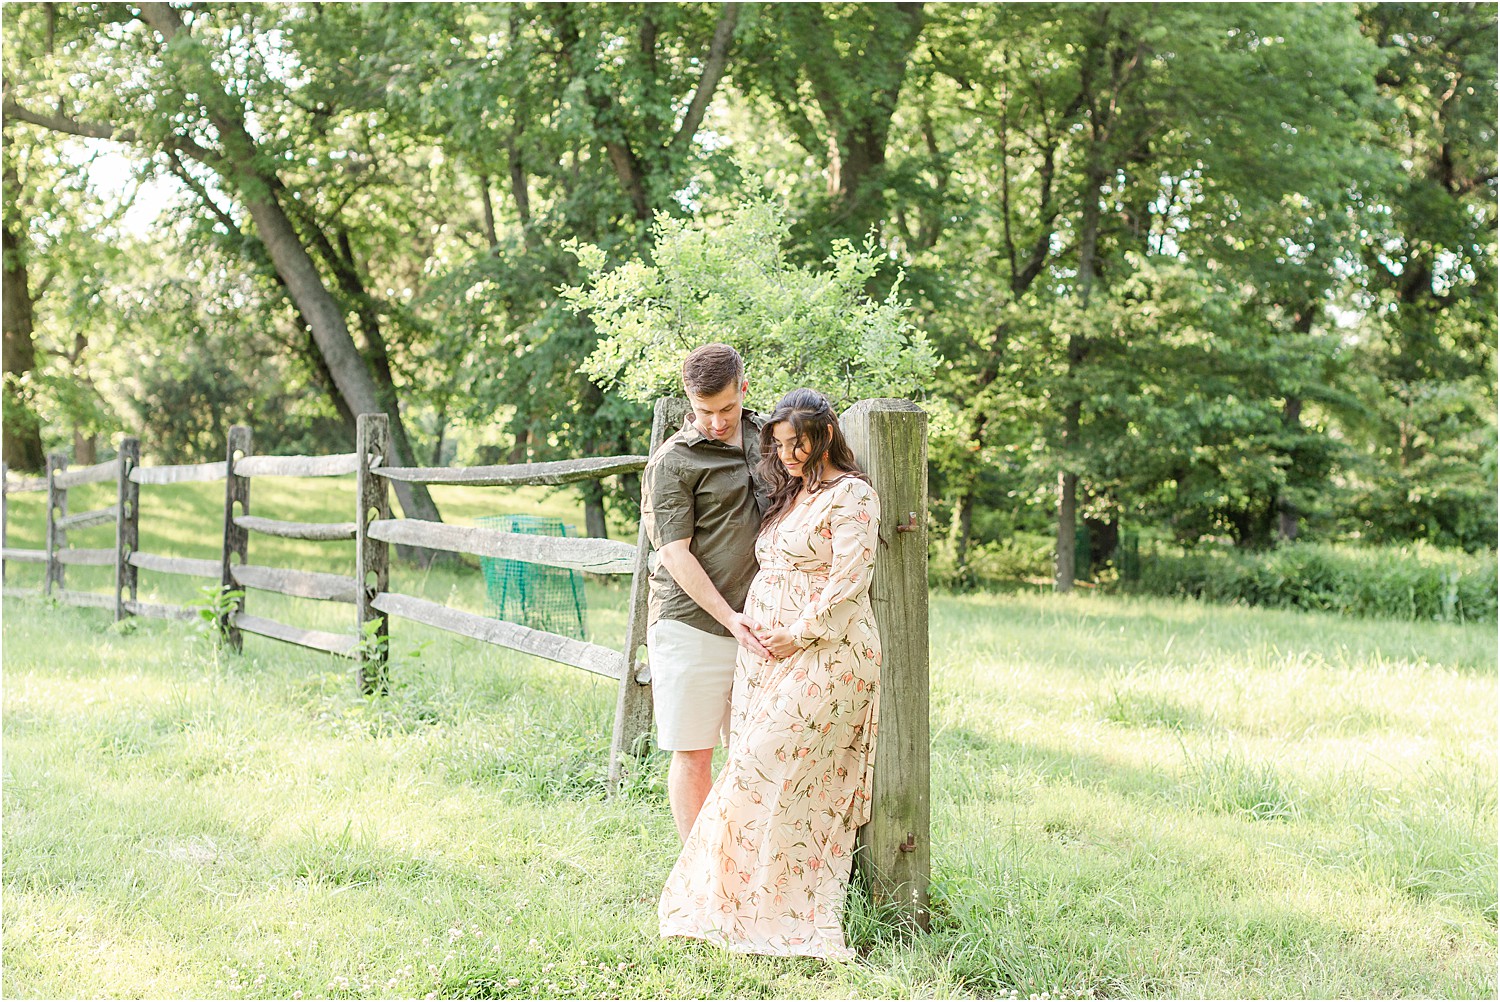 husband touches pregnant wife's baby bump during photo session